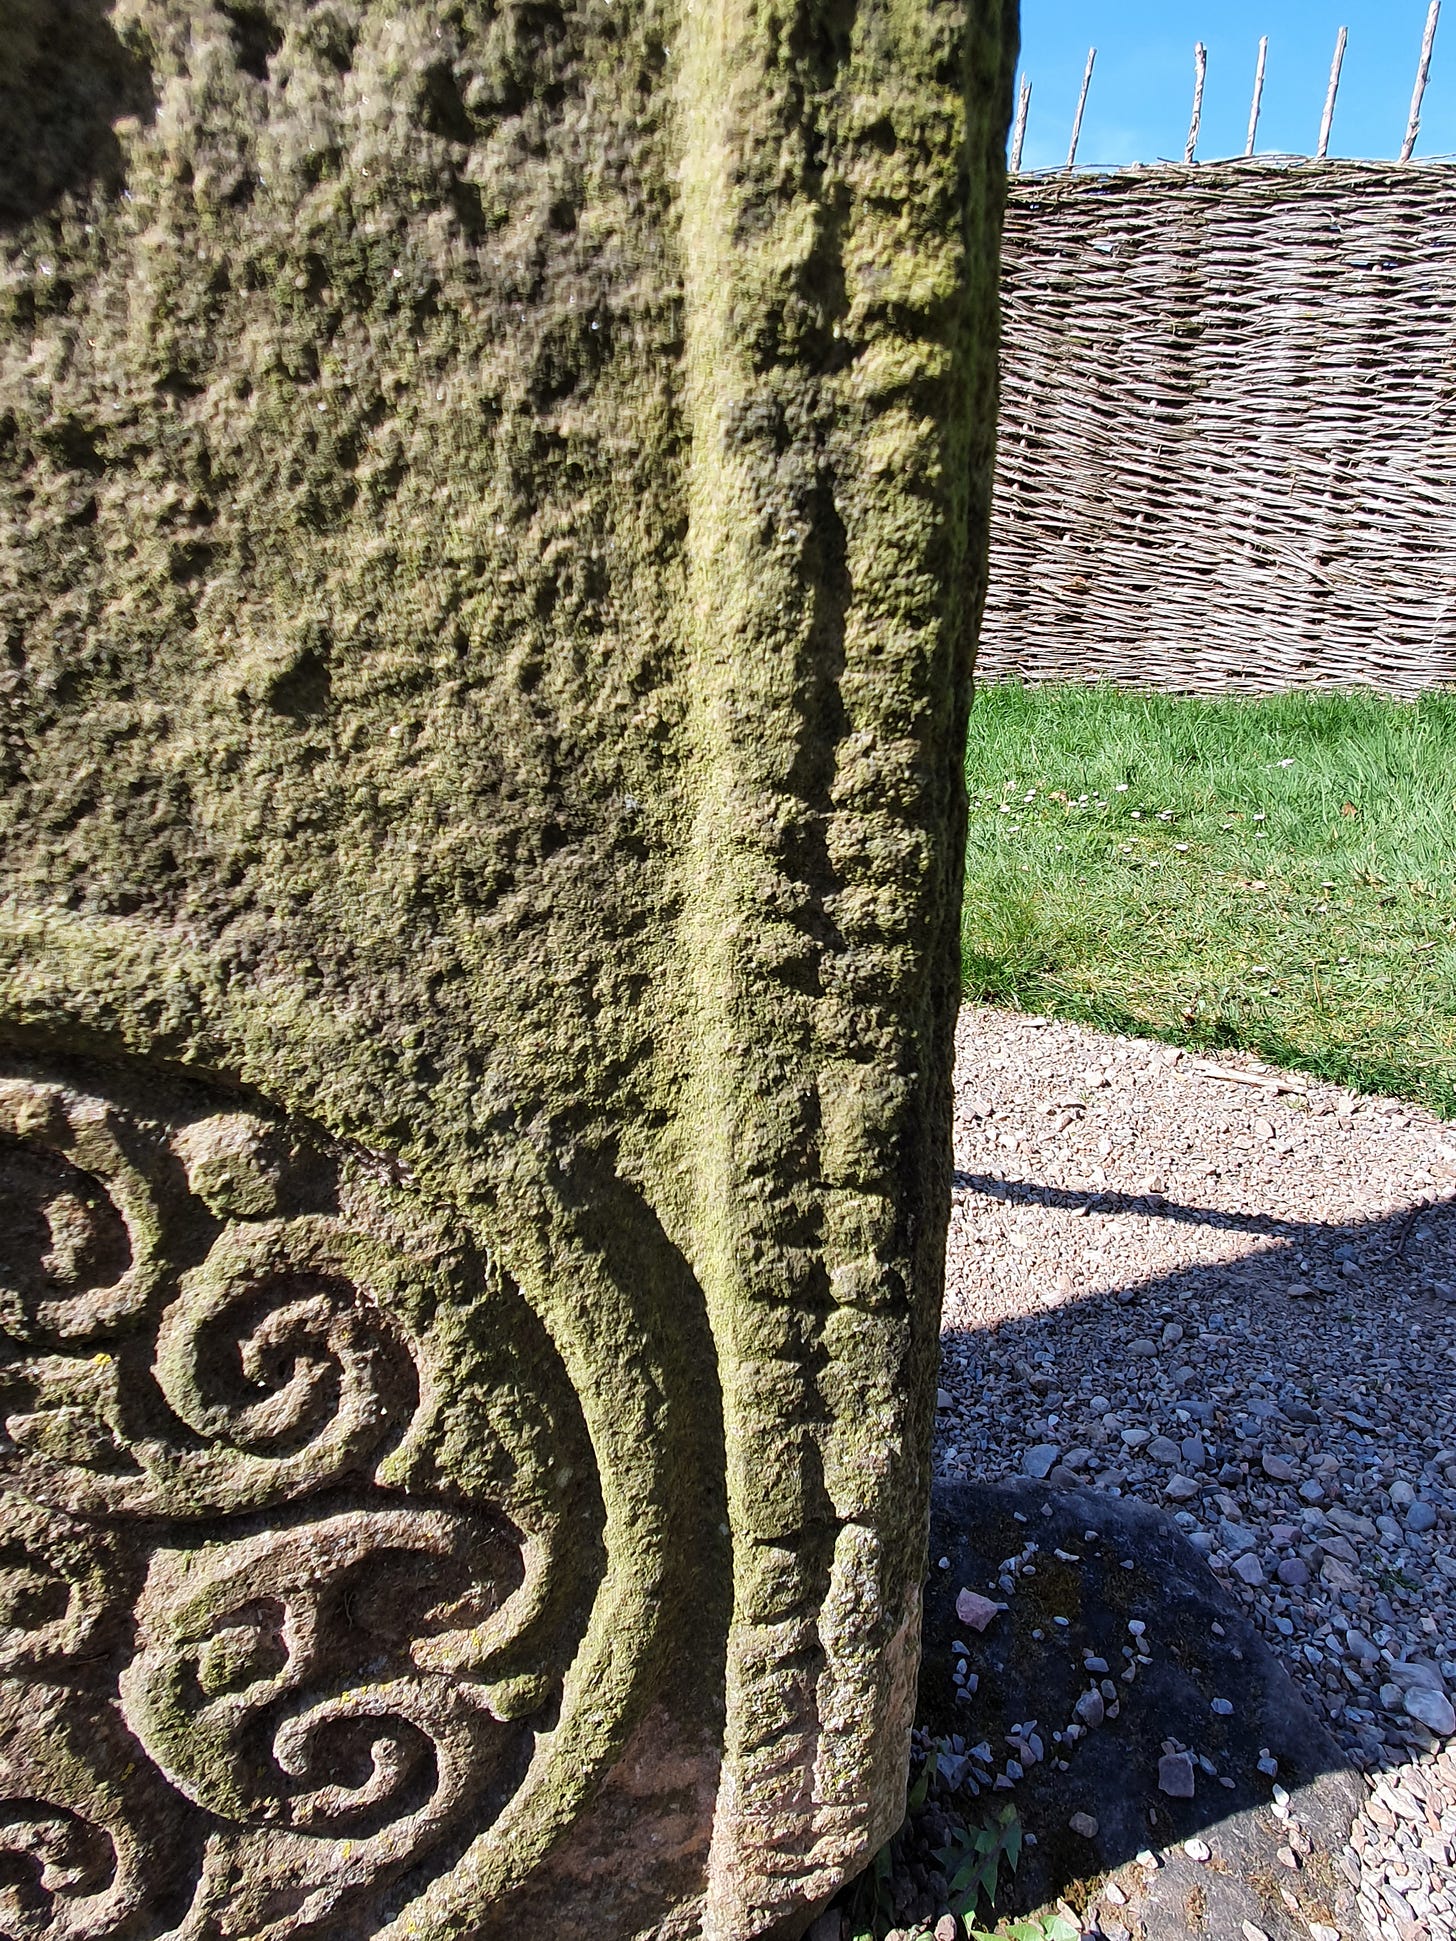 Section of ogham script, comprised of notches along a stem line, inscribed into the edge of the symbol-bearing face of Rodney’s Stone